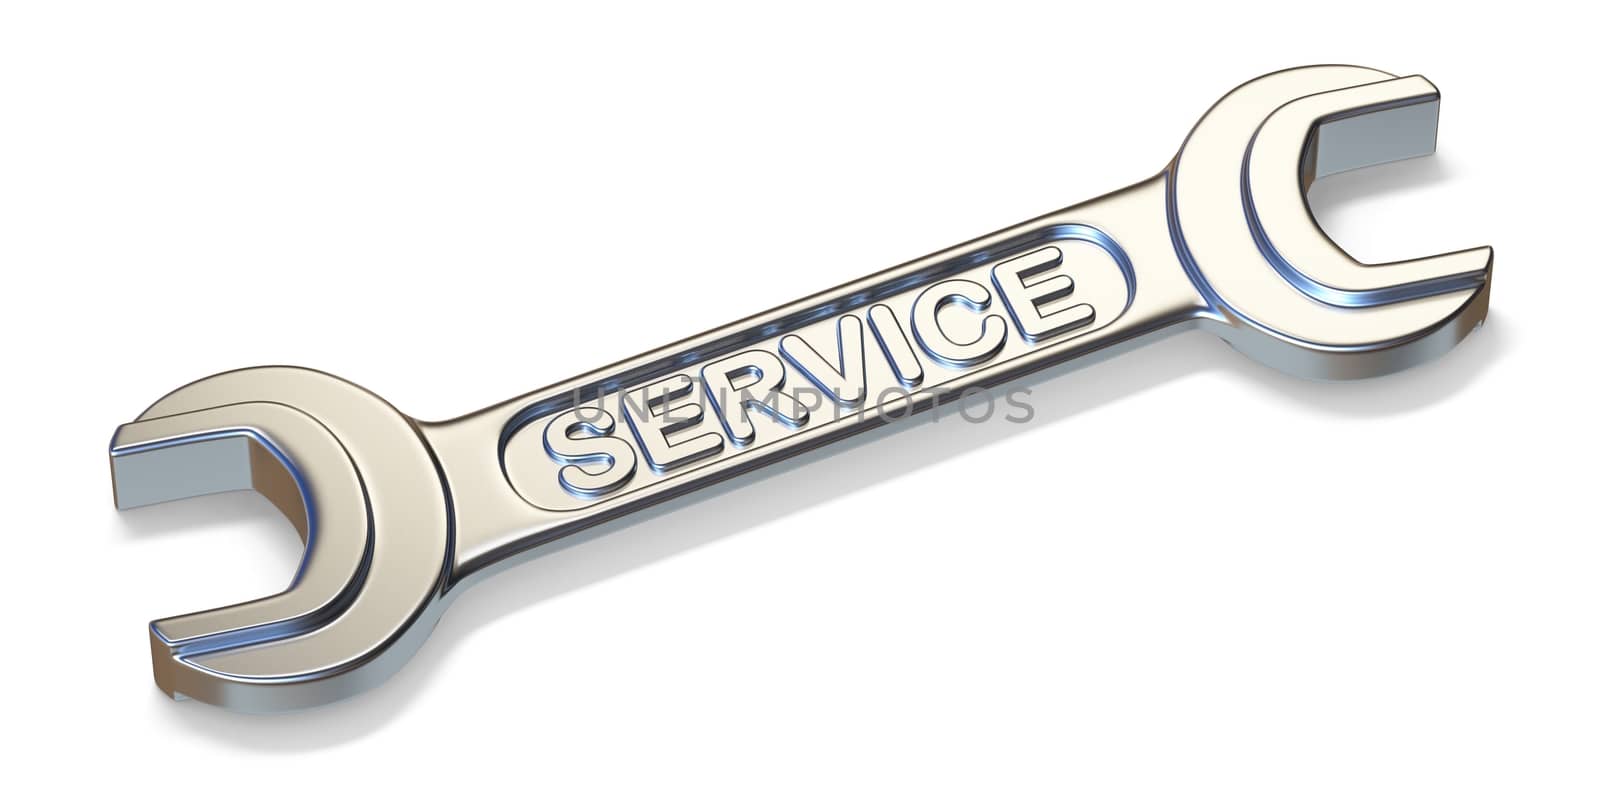 Service wrench tool 3D render illustration isolated on white background